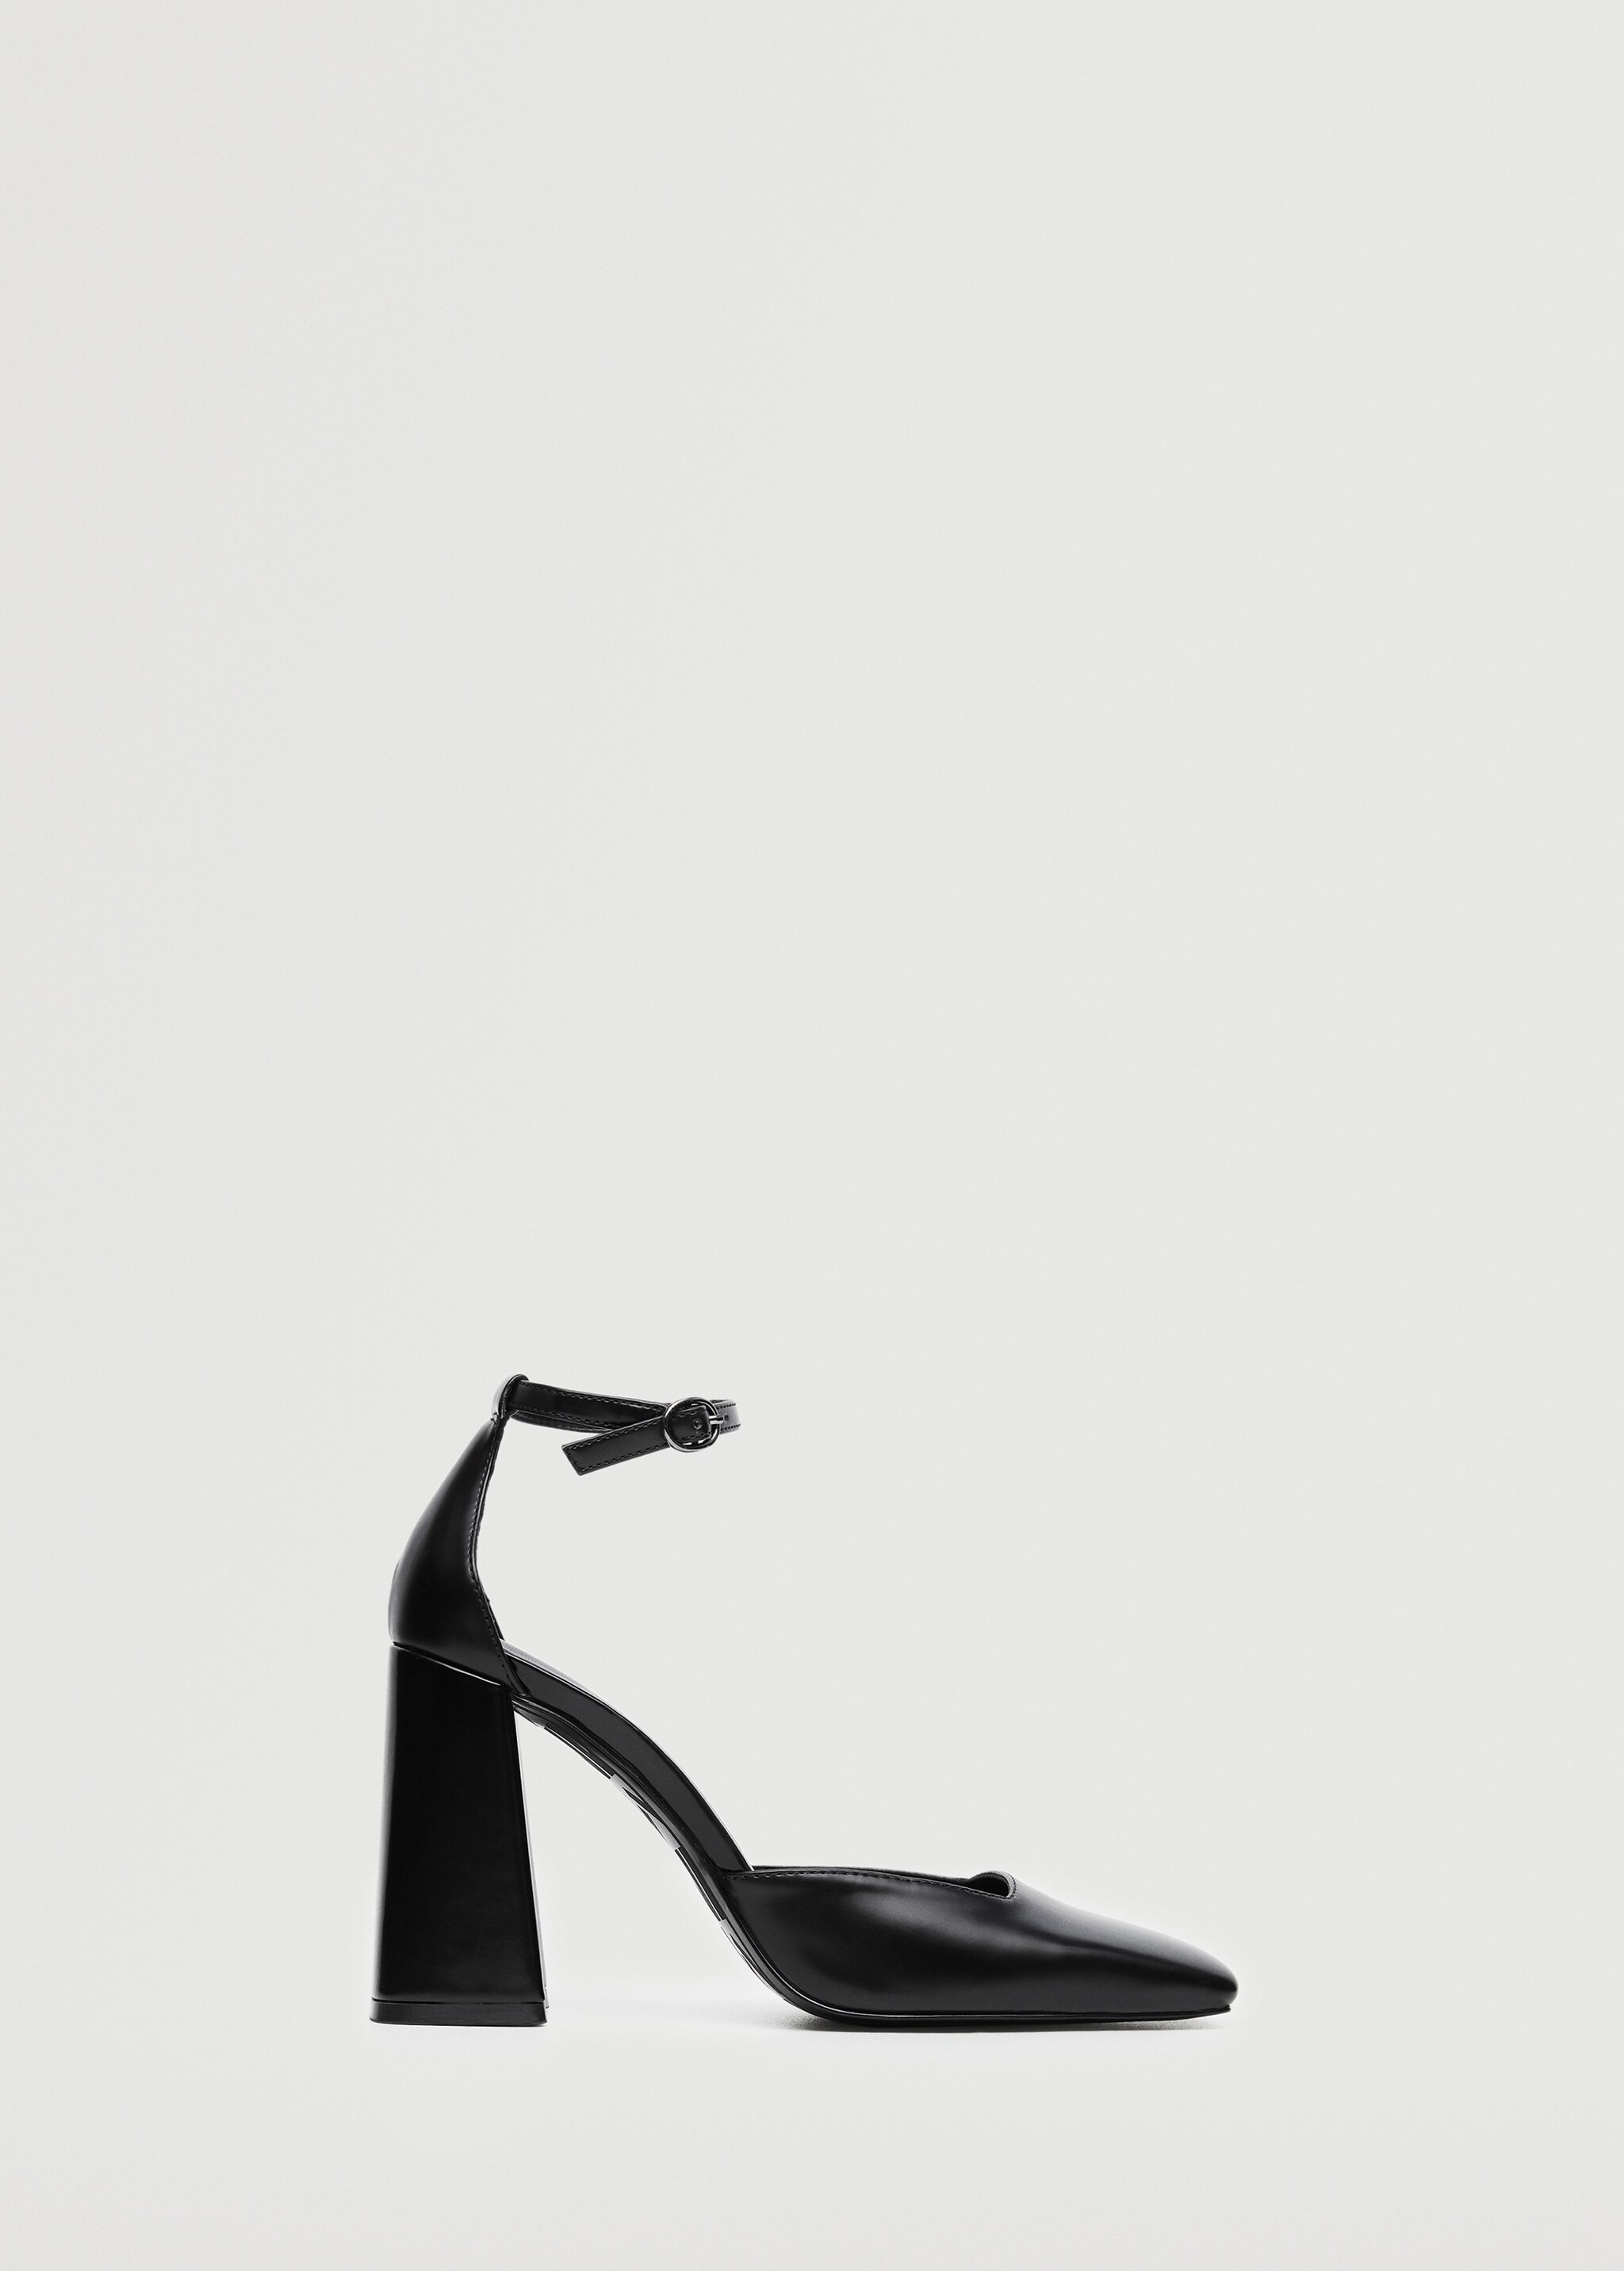 Ankle-cuff heel shoes - Article without model